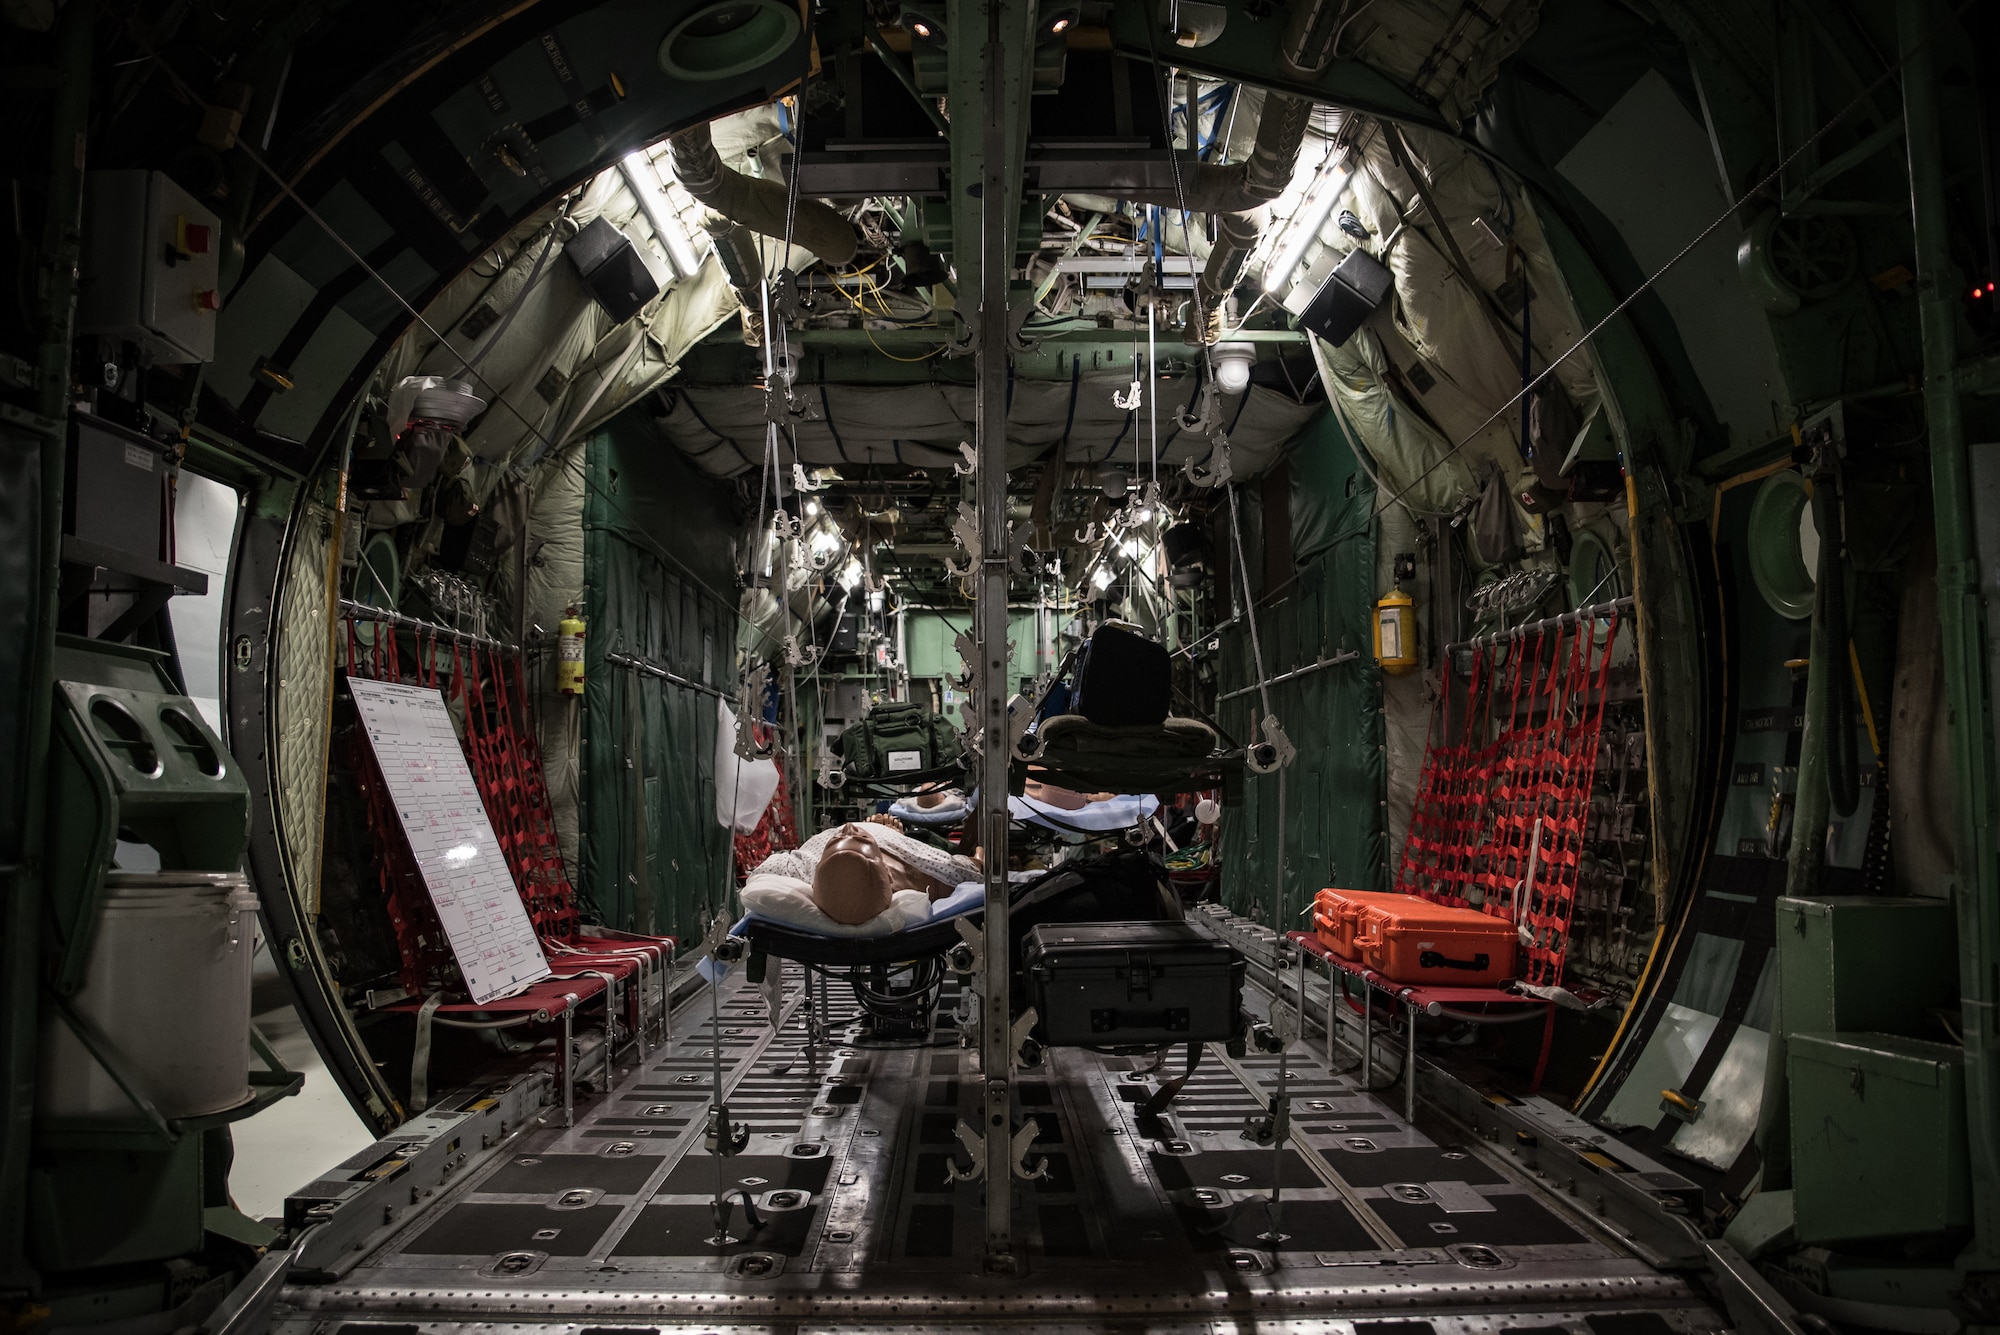 WRIGHT-PATTERSON AIR FORCE BASE (AFRL), Ohio – An aircraft simulator in the U.S. Air Force School of Aerospace Medicine, or USAFSAM, building displays a hospital inside an aircraft, ready to use by medical Airmen for aeromedical evacuation missions. USAFSAM is one of two mission units in the 711th Human Performance Wing, part of the Air Force Research Laboratory at Wright-Patterson Air Force Base, Ohio. The simulators are equipped with smoke, sound, fire, cameras and temperature changes, allowing the school to run realistic training.  (U.S. Air Force photo / Richard Eldridge)